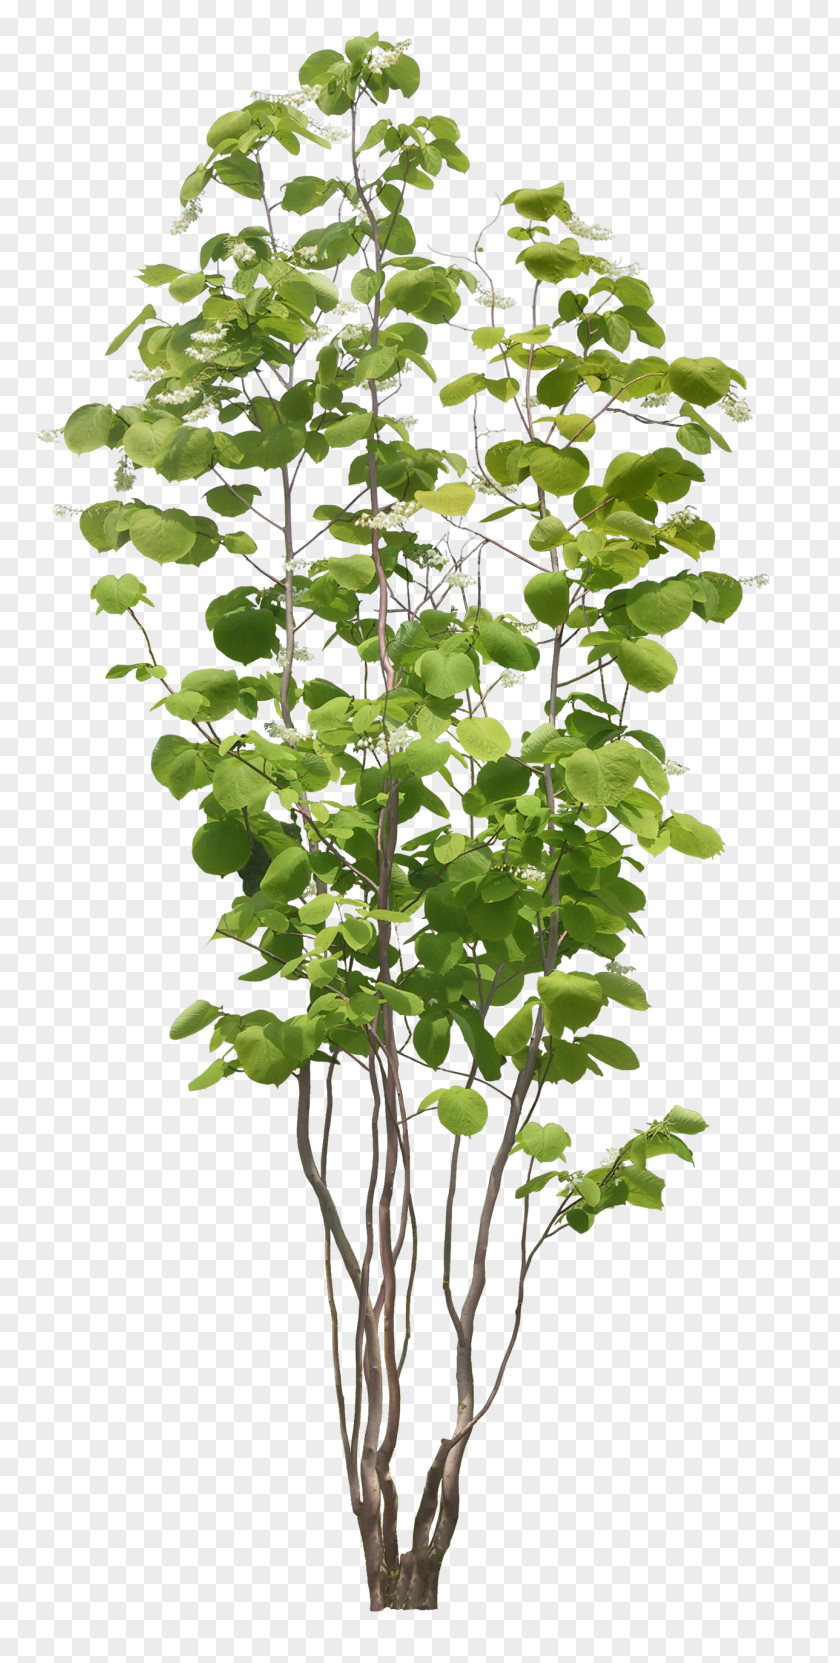 Tree Adobe Photoshop Architectural Rendering Image PNG